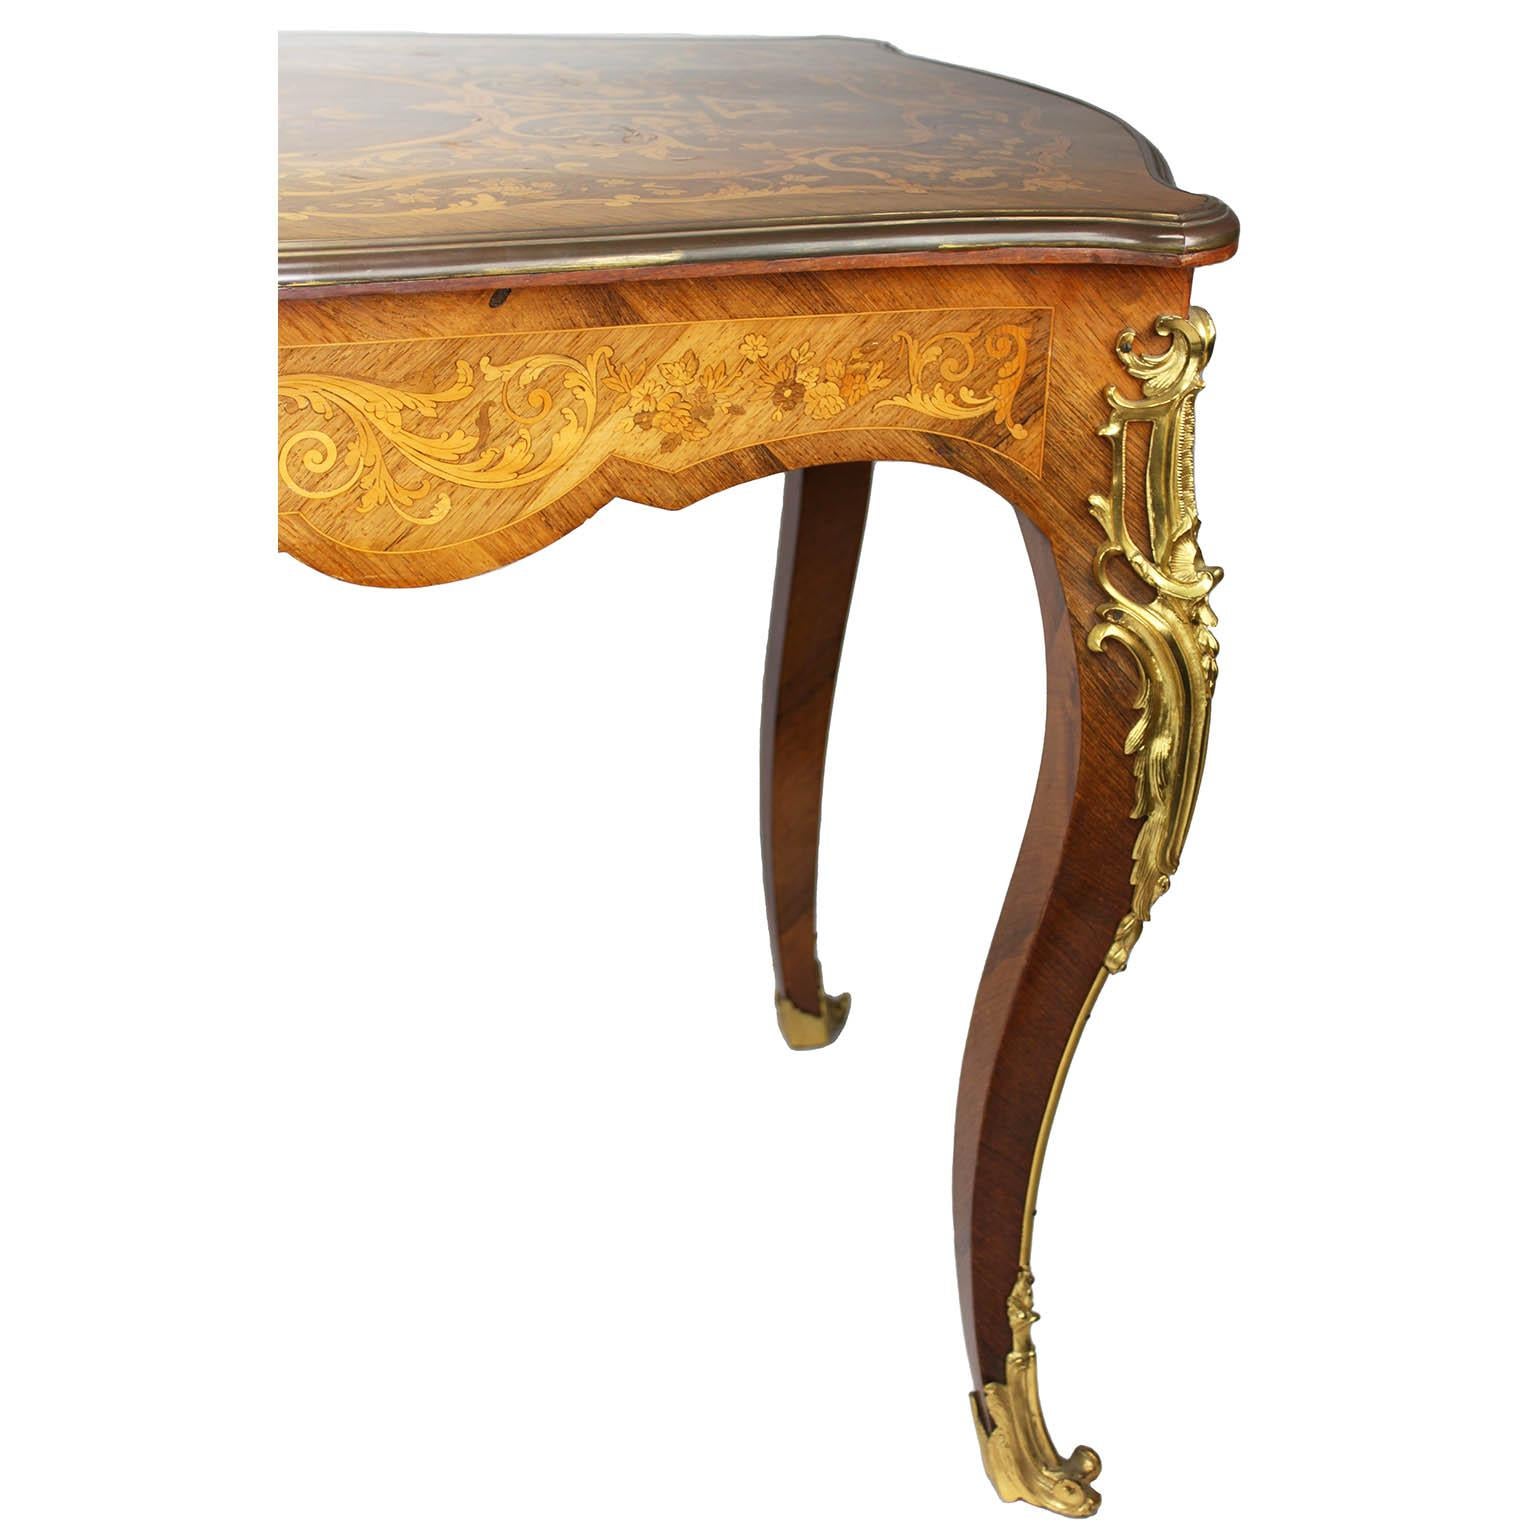 A French 19th/20th Century Louis XV Style Tulipwood Marquetry Writing Table/Desk For Sale 7